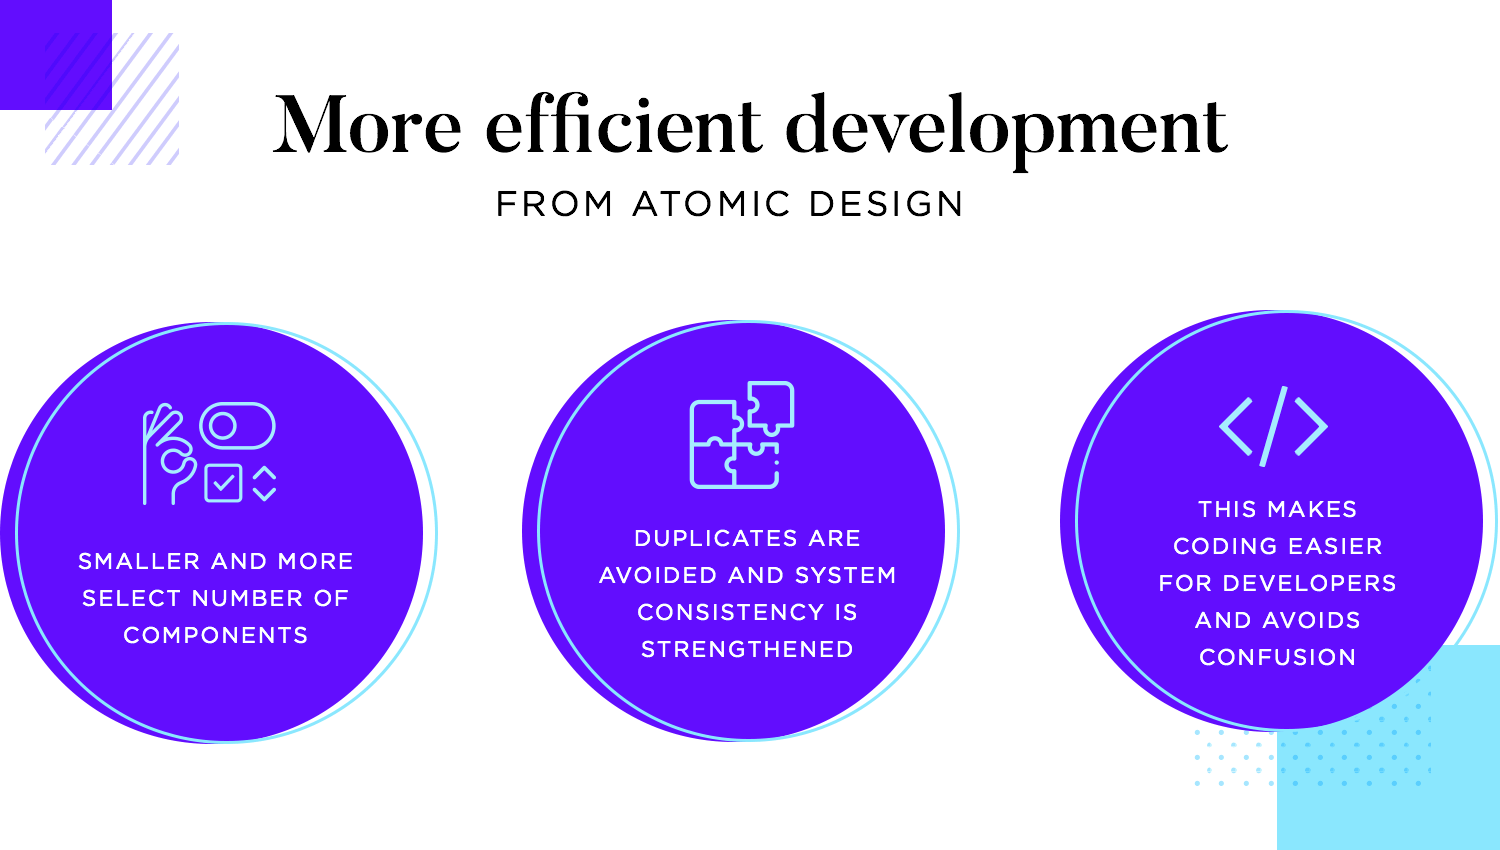 Efficiency in atomic design systems